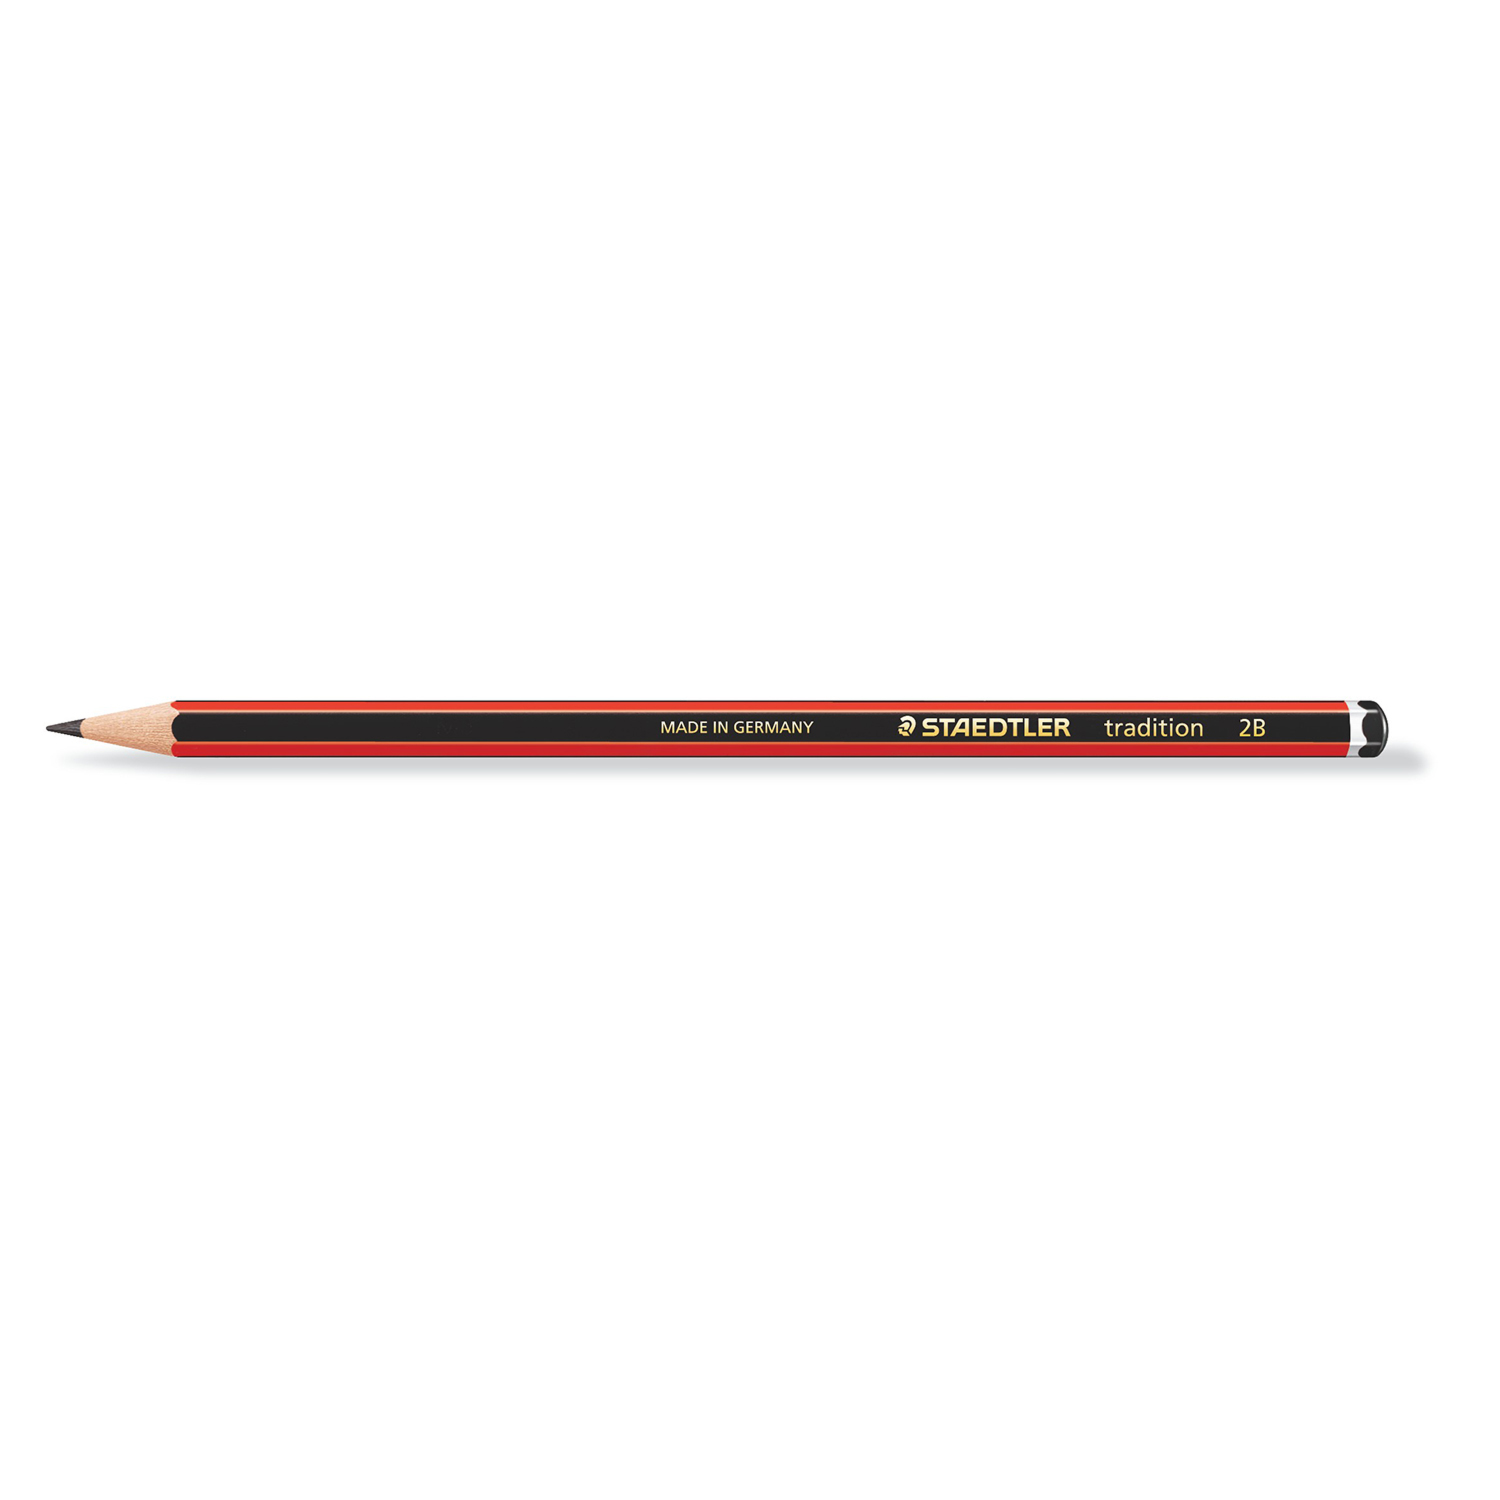 Staedtler Traditional Pencil - 2B Image